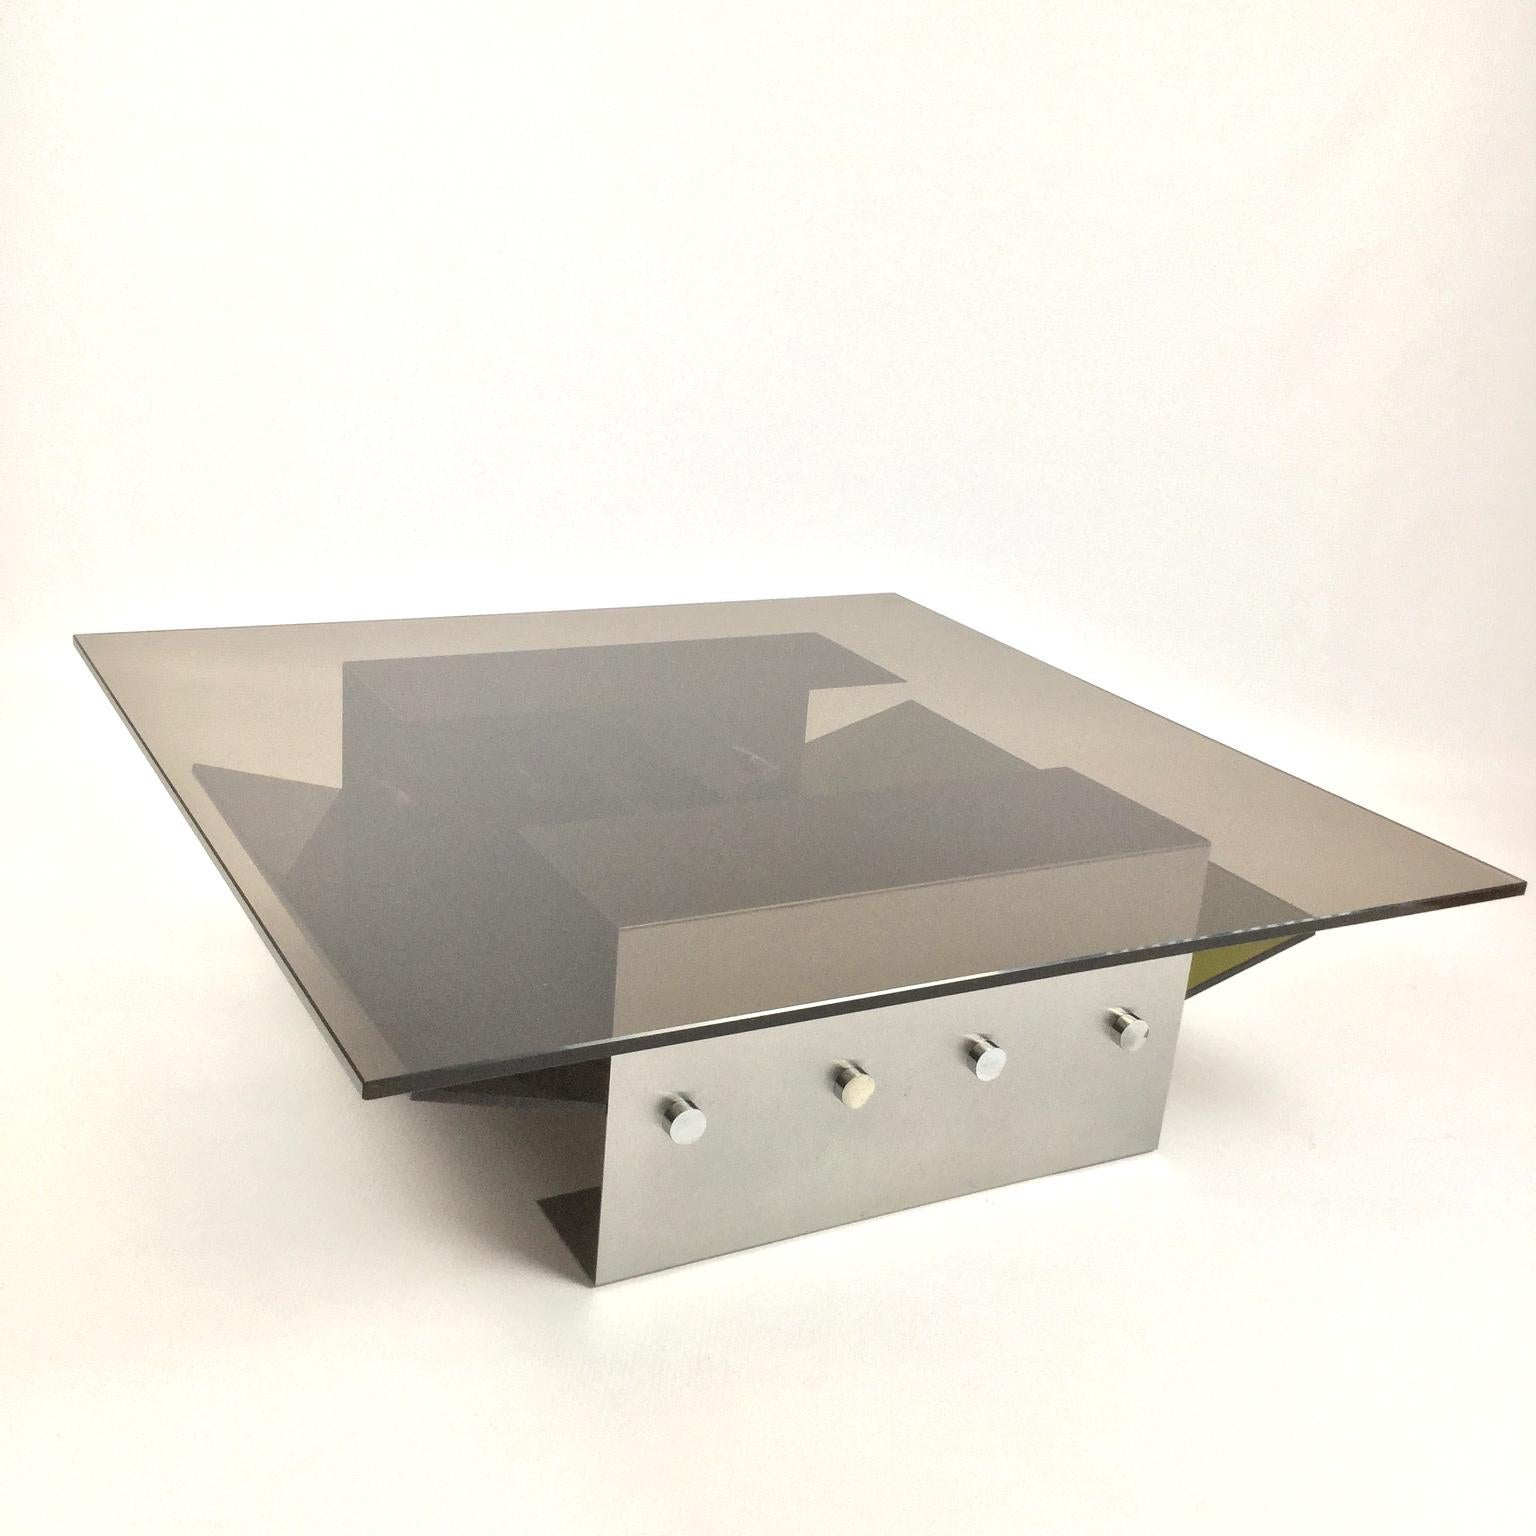 1970s stainless steel coffee table with perspex magazine rack
and large brown top glass.
In a style of the French designer François Monnet for Kappa.